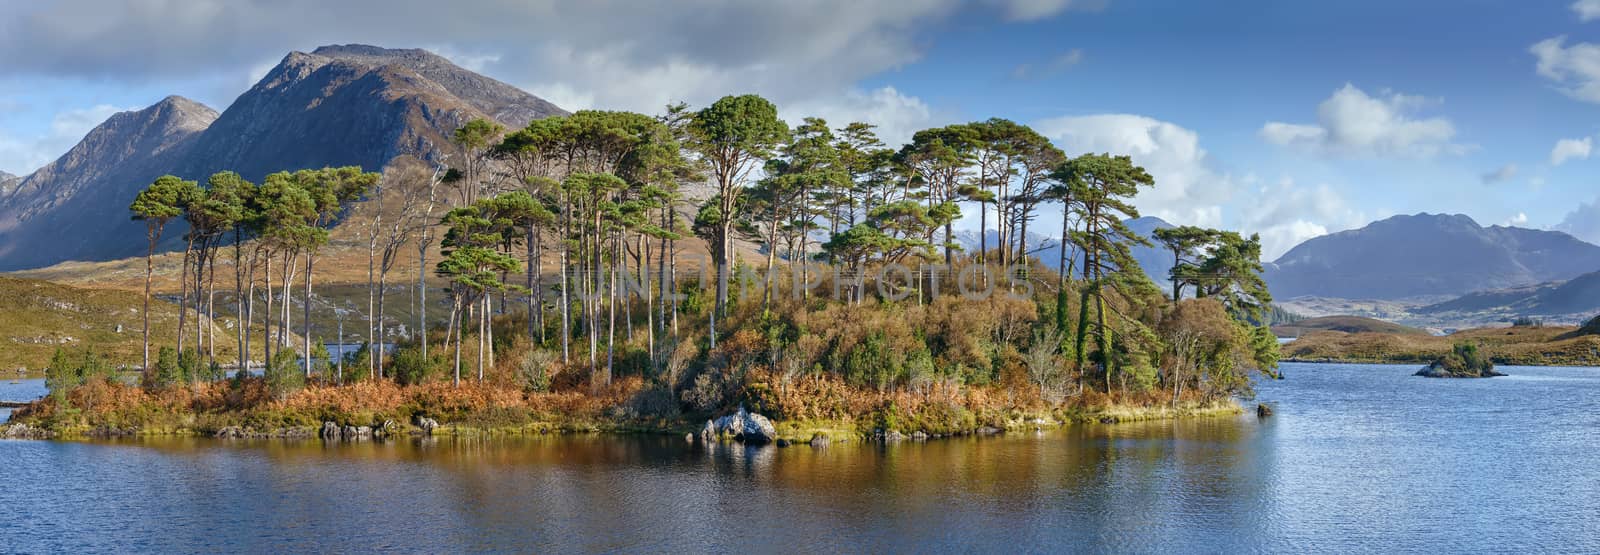 Landscape with lake in Galway county, Ireland by borisb17